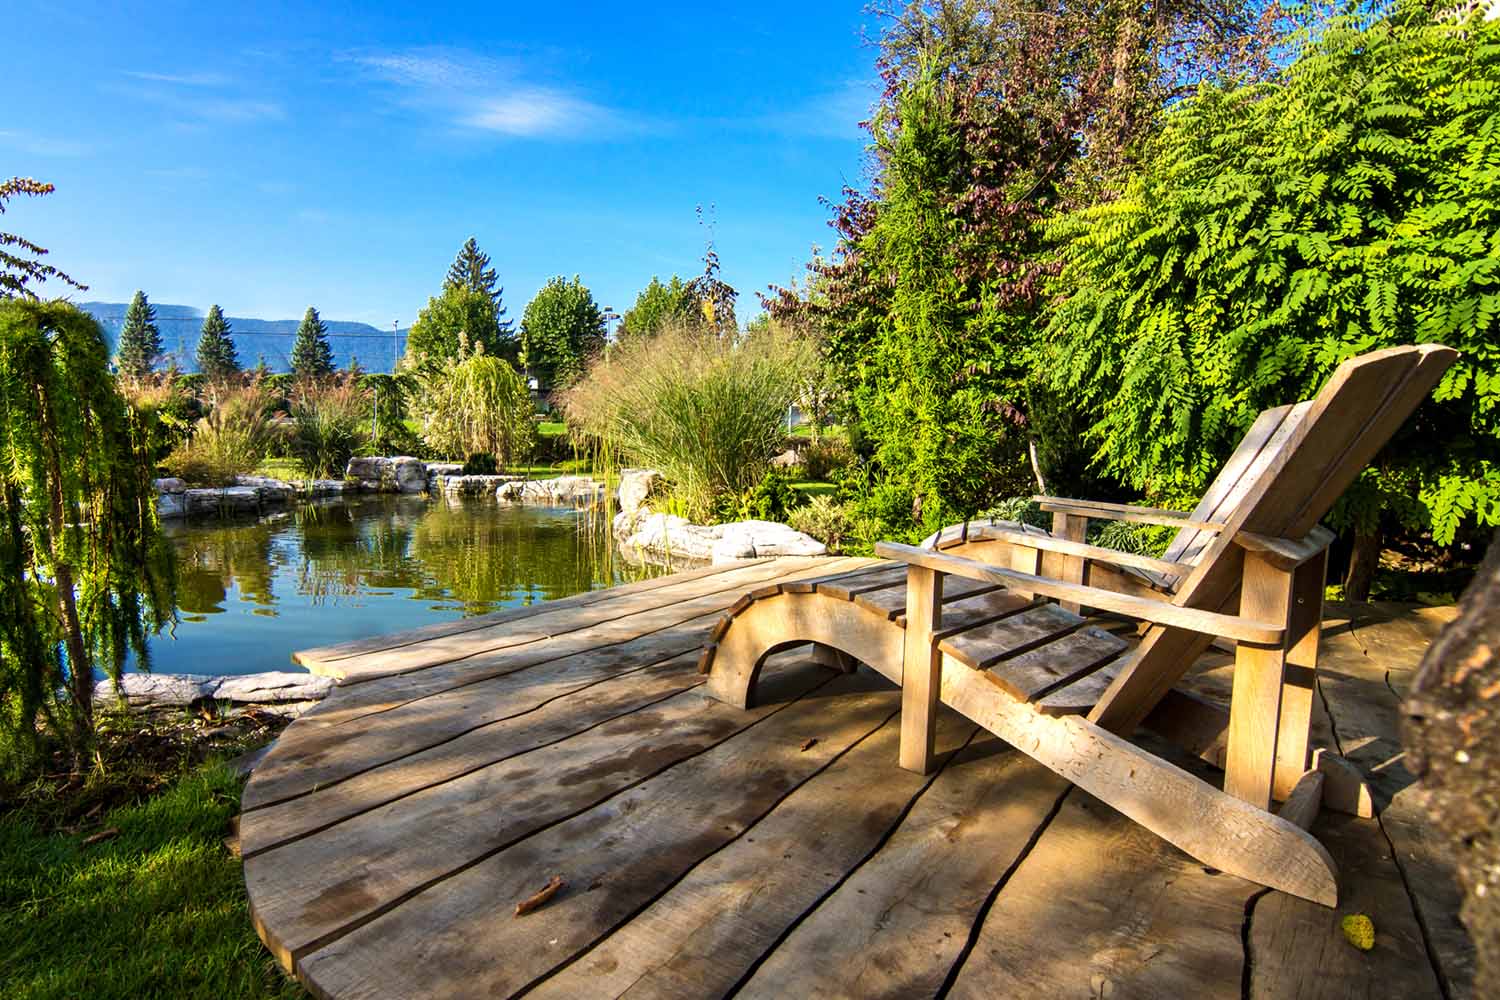 seattle hardscapes pond in a beautiful creative lush green blooming g 2021 08 26 17 06 11 utc stock photo placeholder